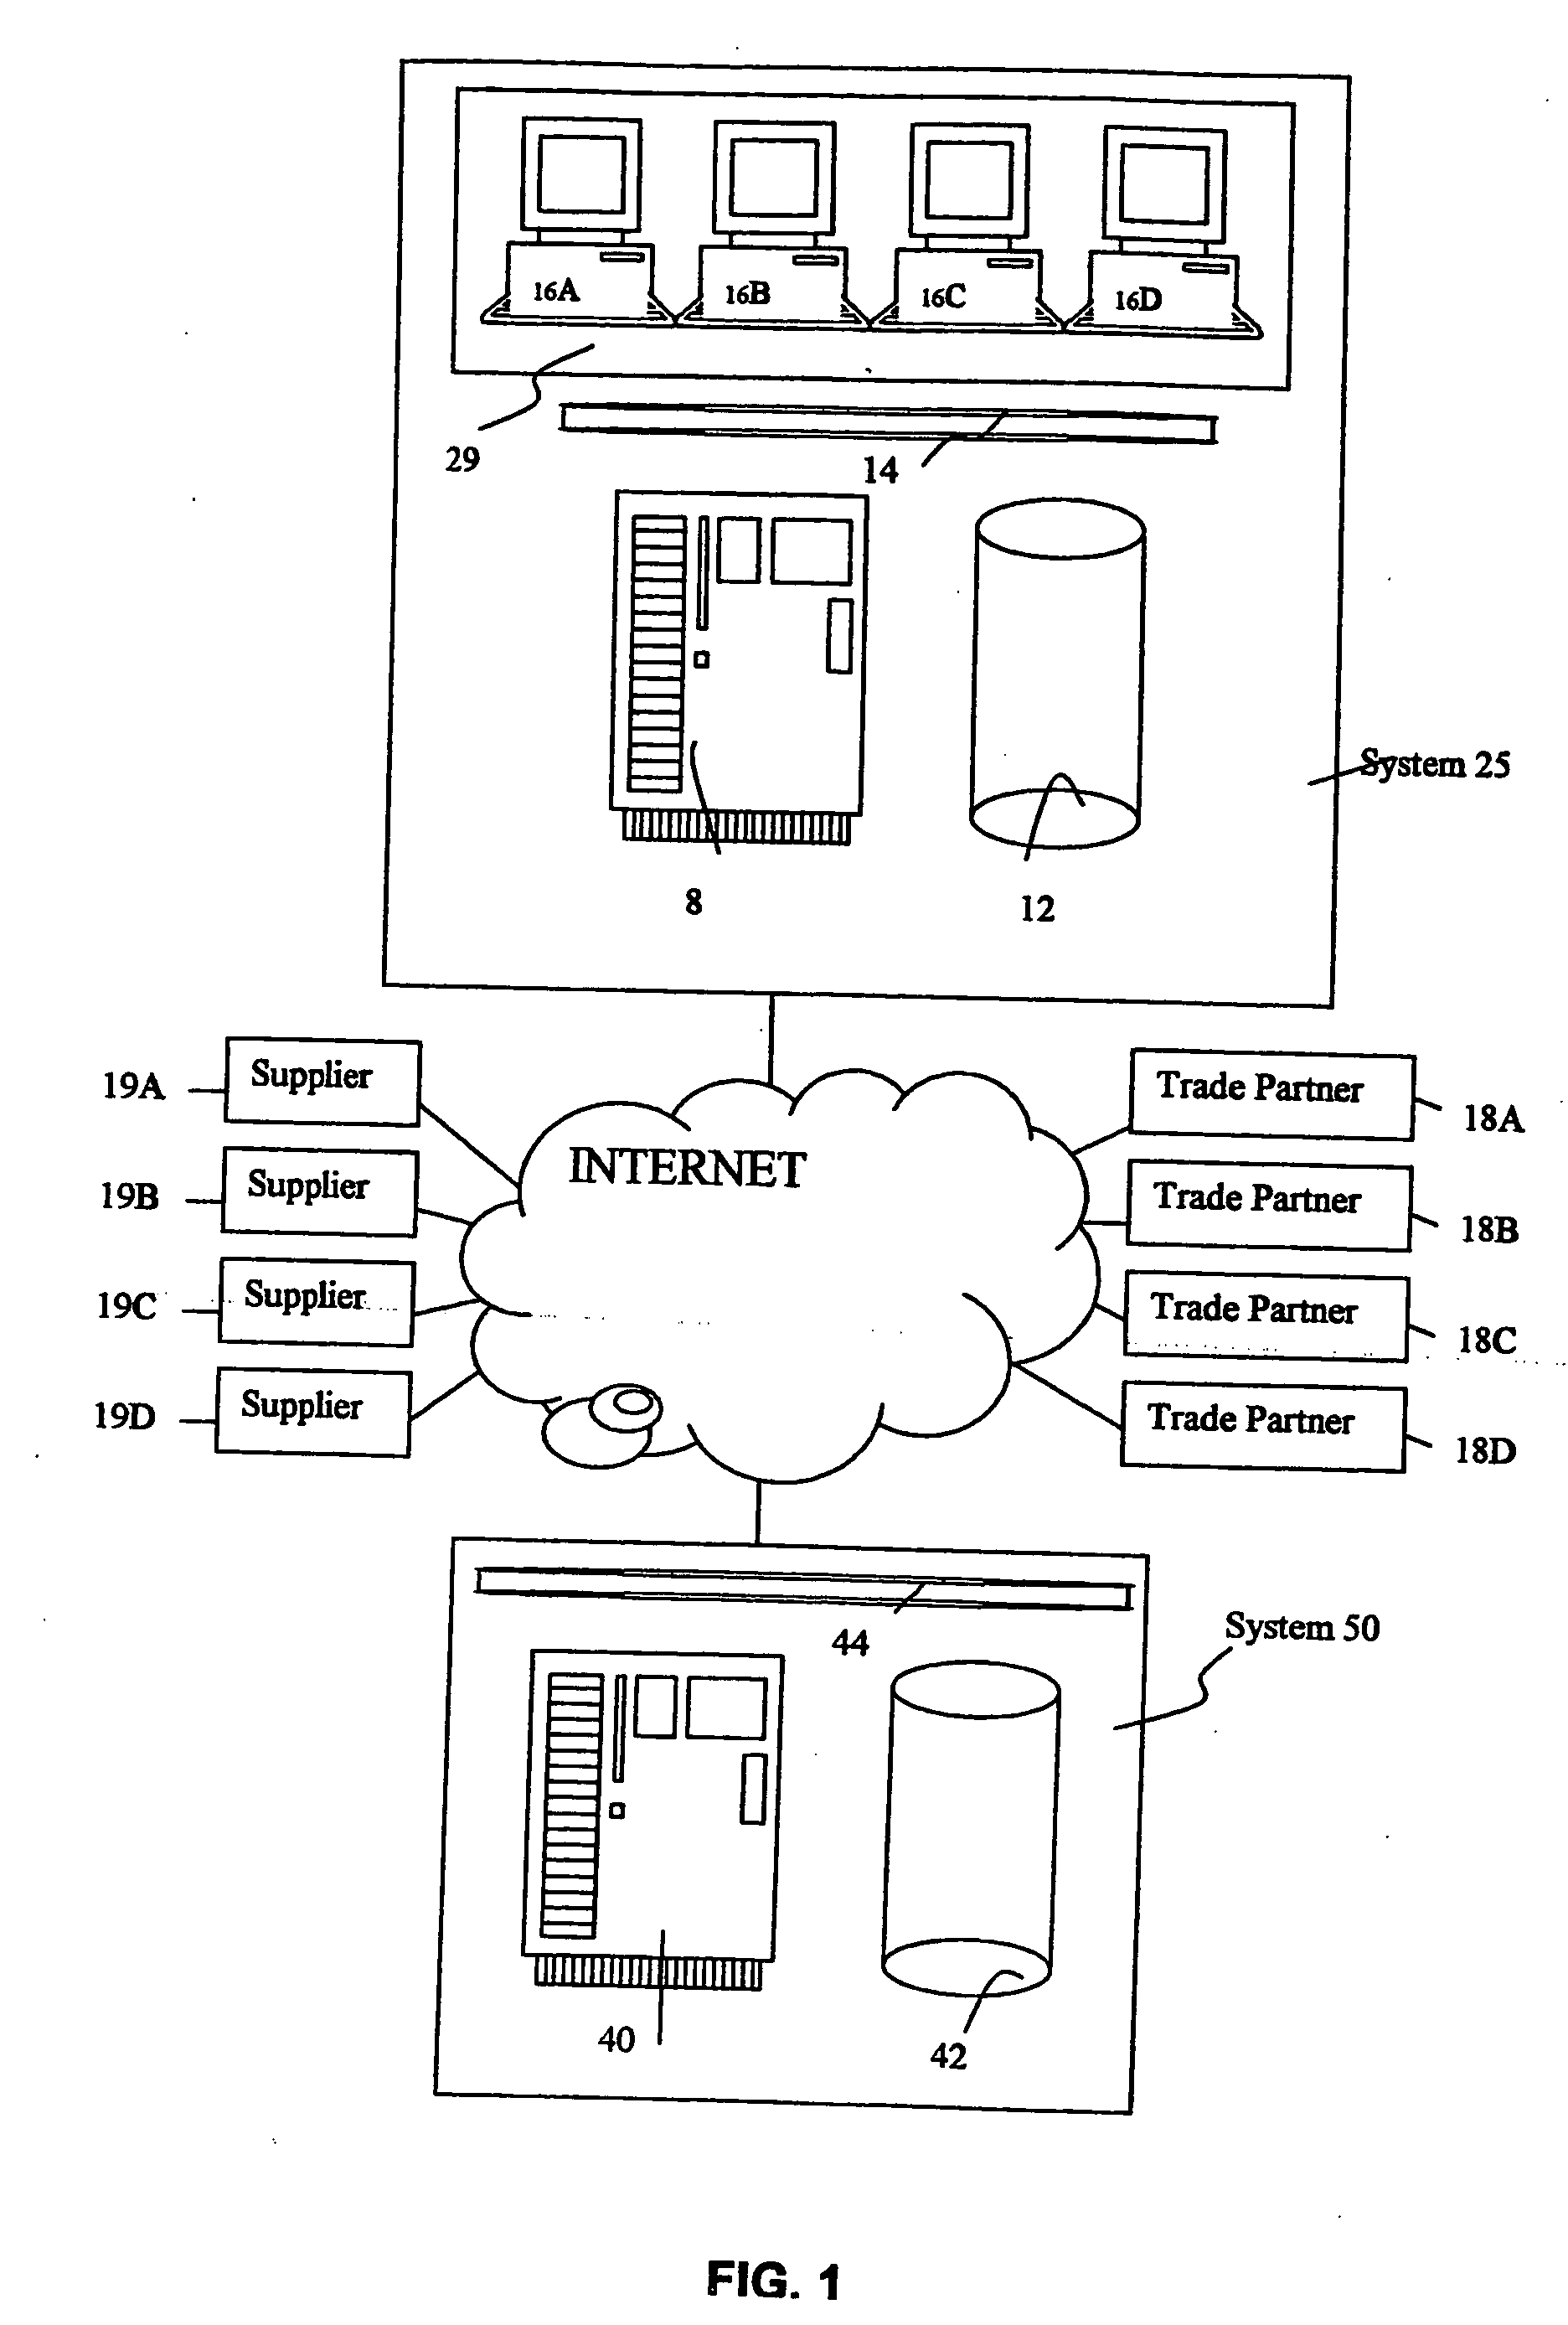 Method and system for automating proposals involving direct and indirect sales